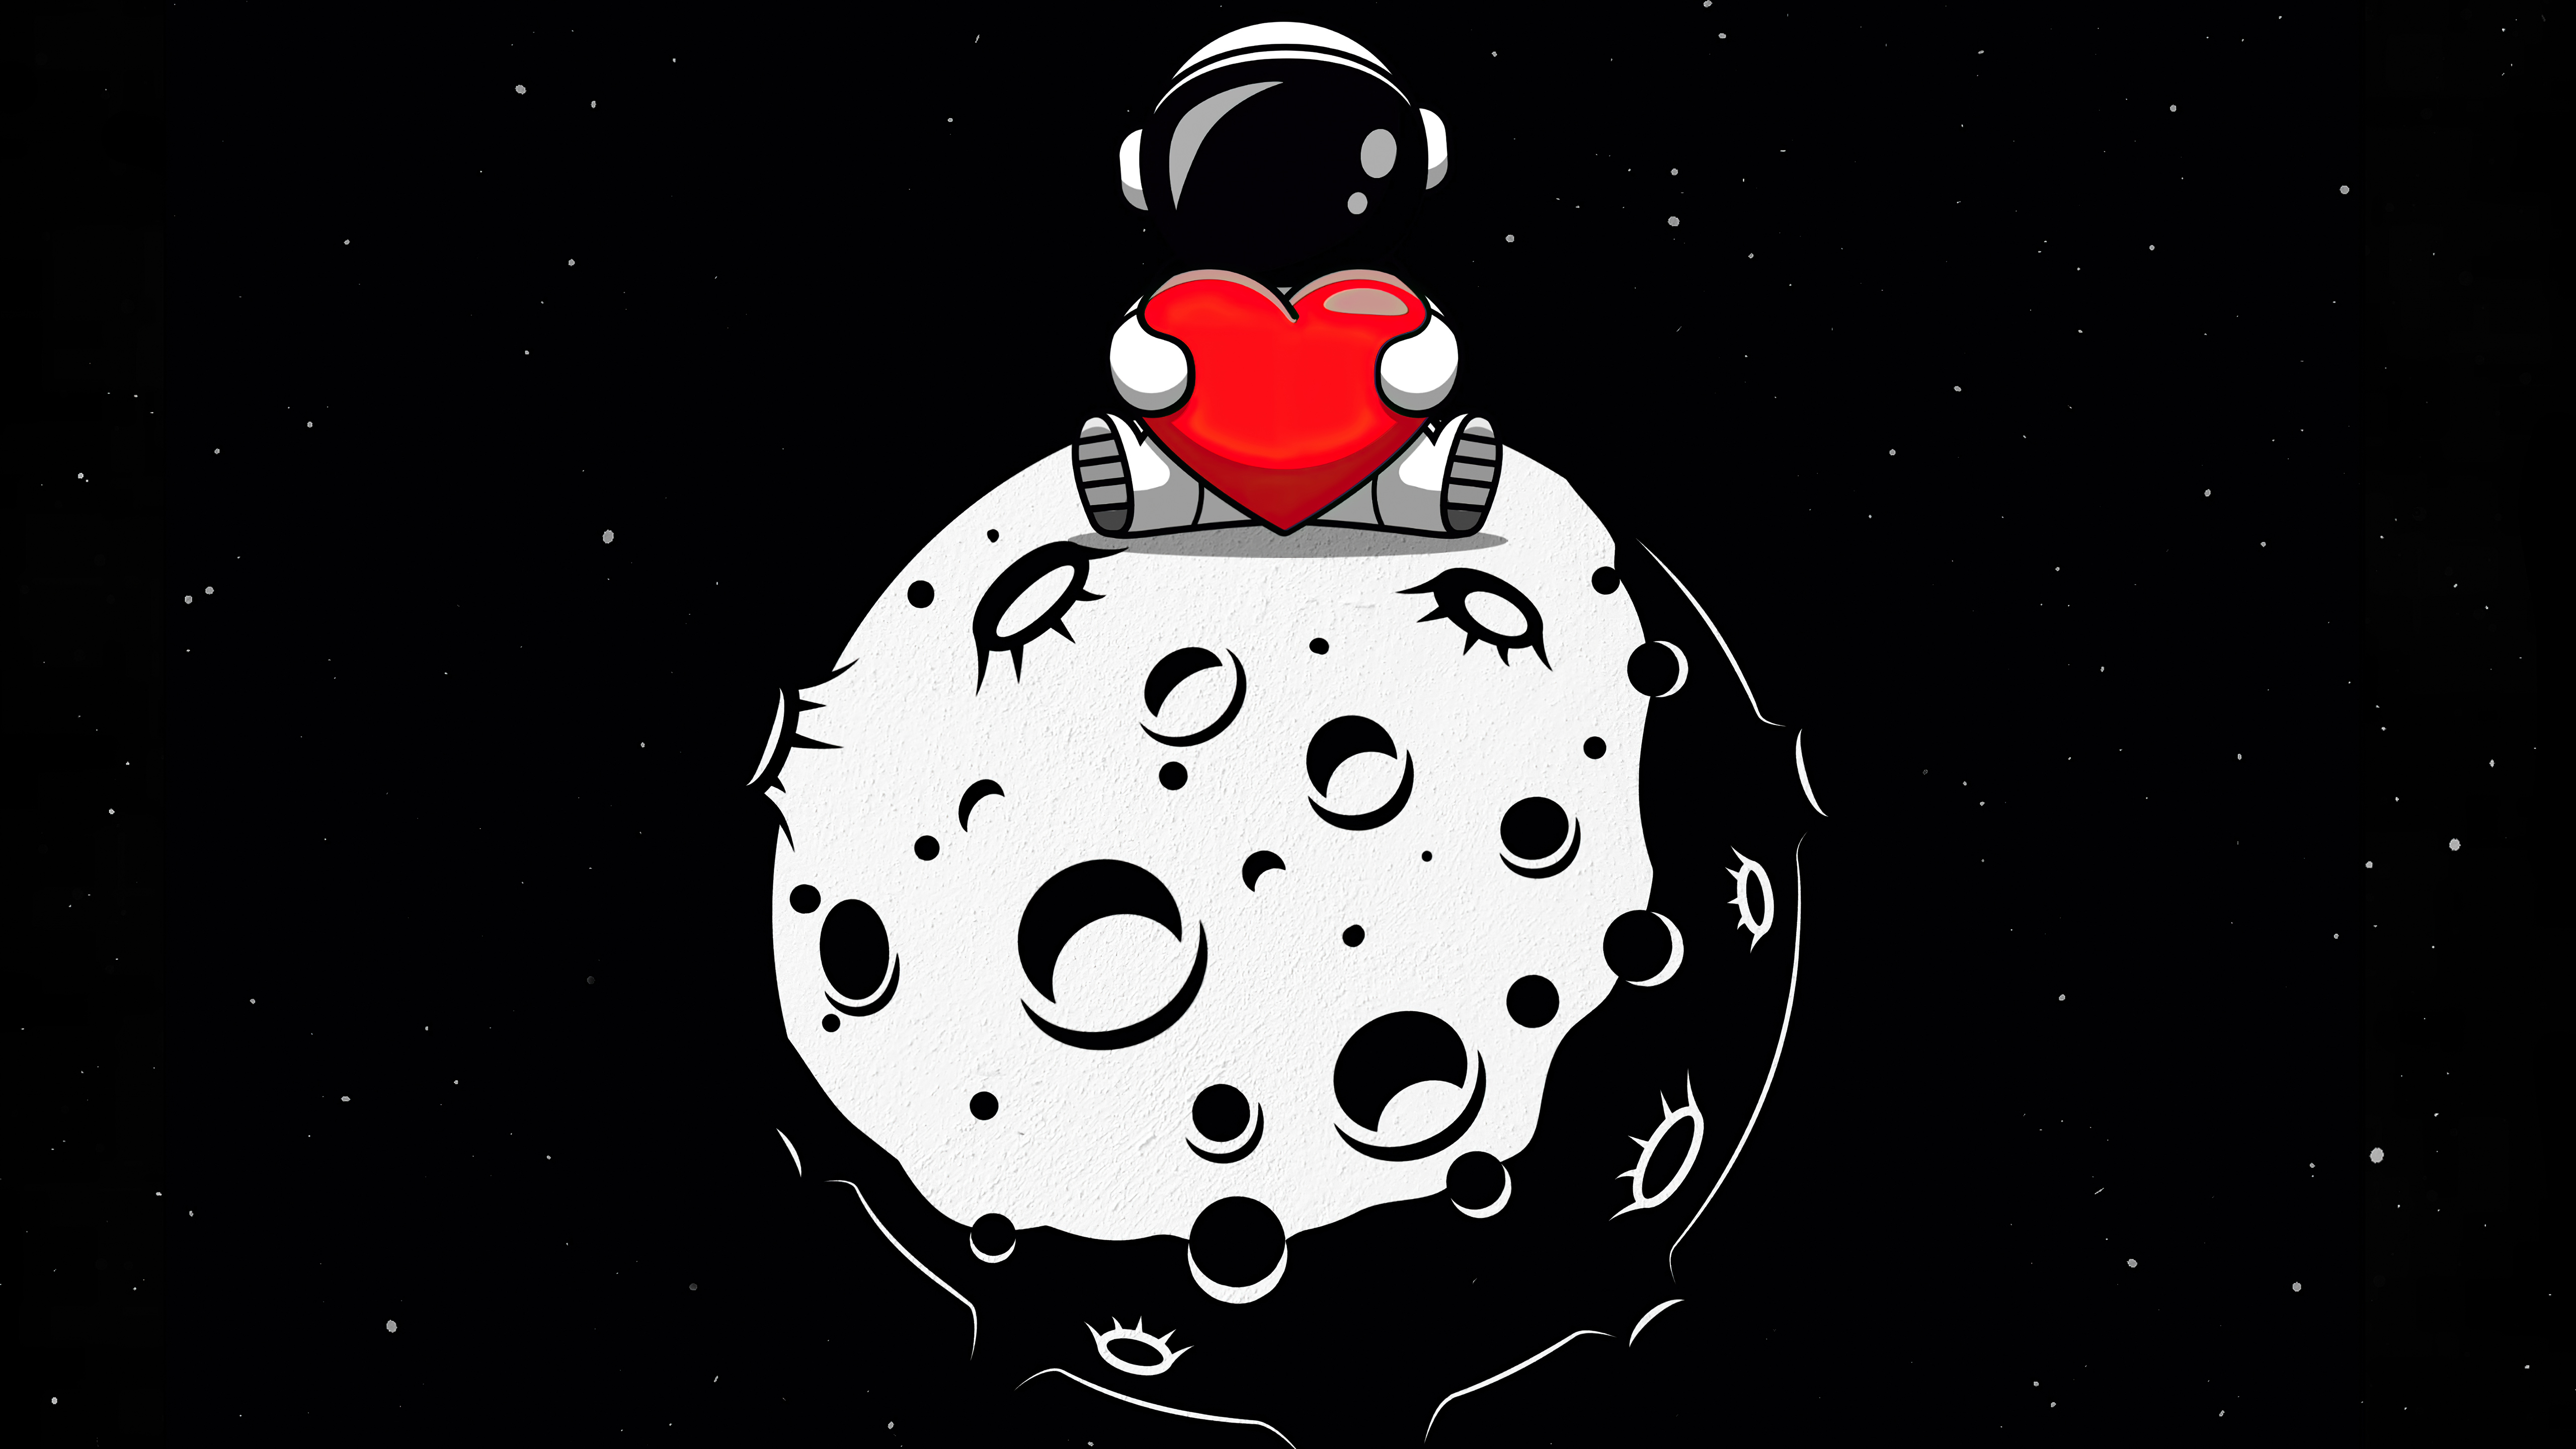 Red Heart Wallpaper 4K, Astronaut, Planet, Outer Space, Black Background, Black Dark